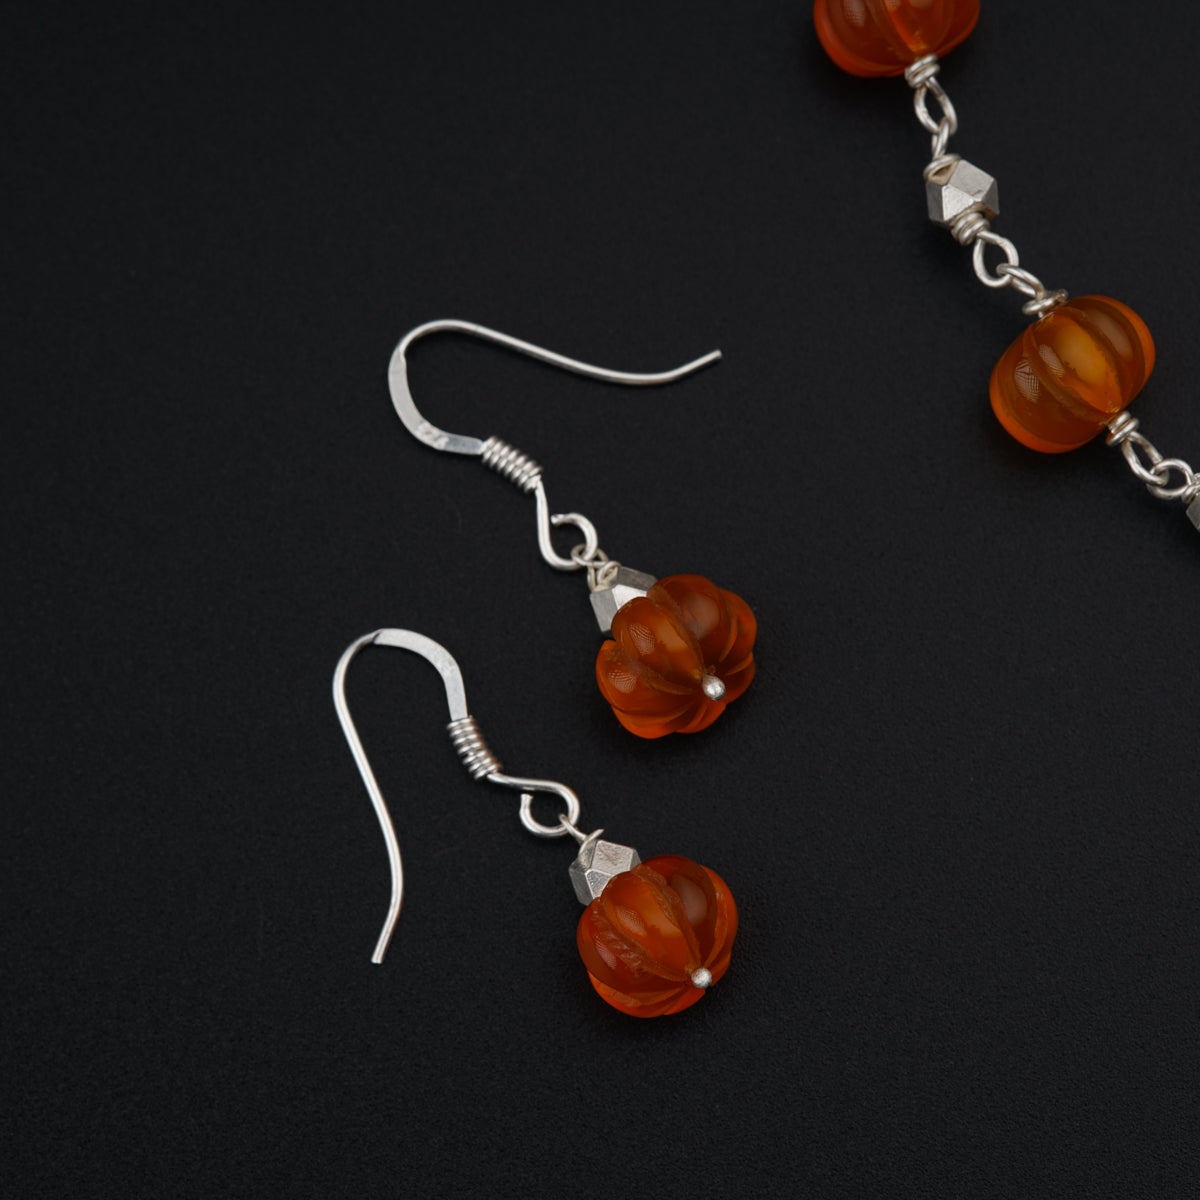 Silver set with carved Carnelian stones